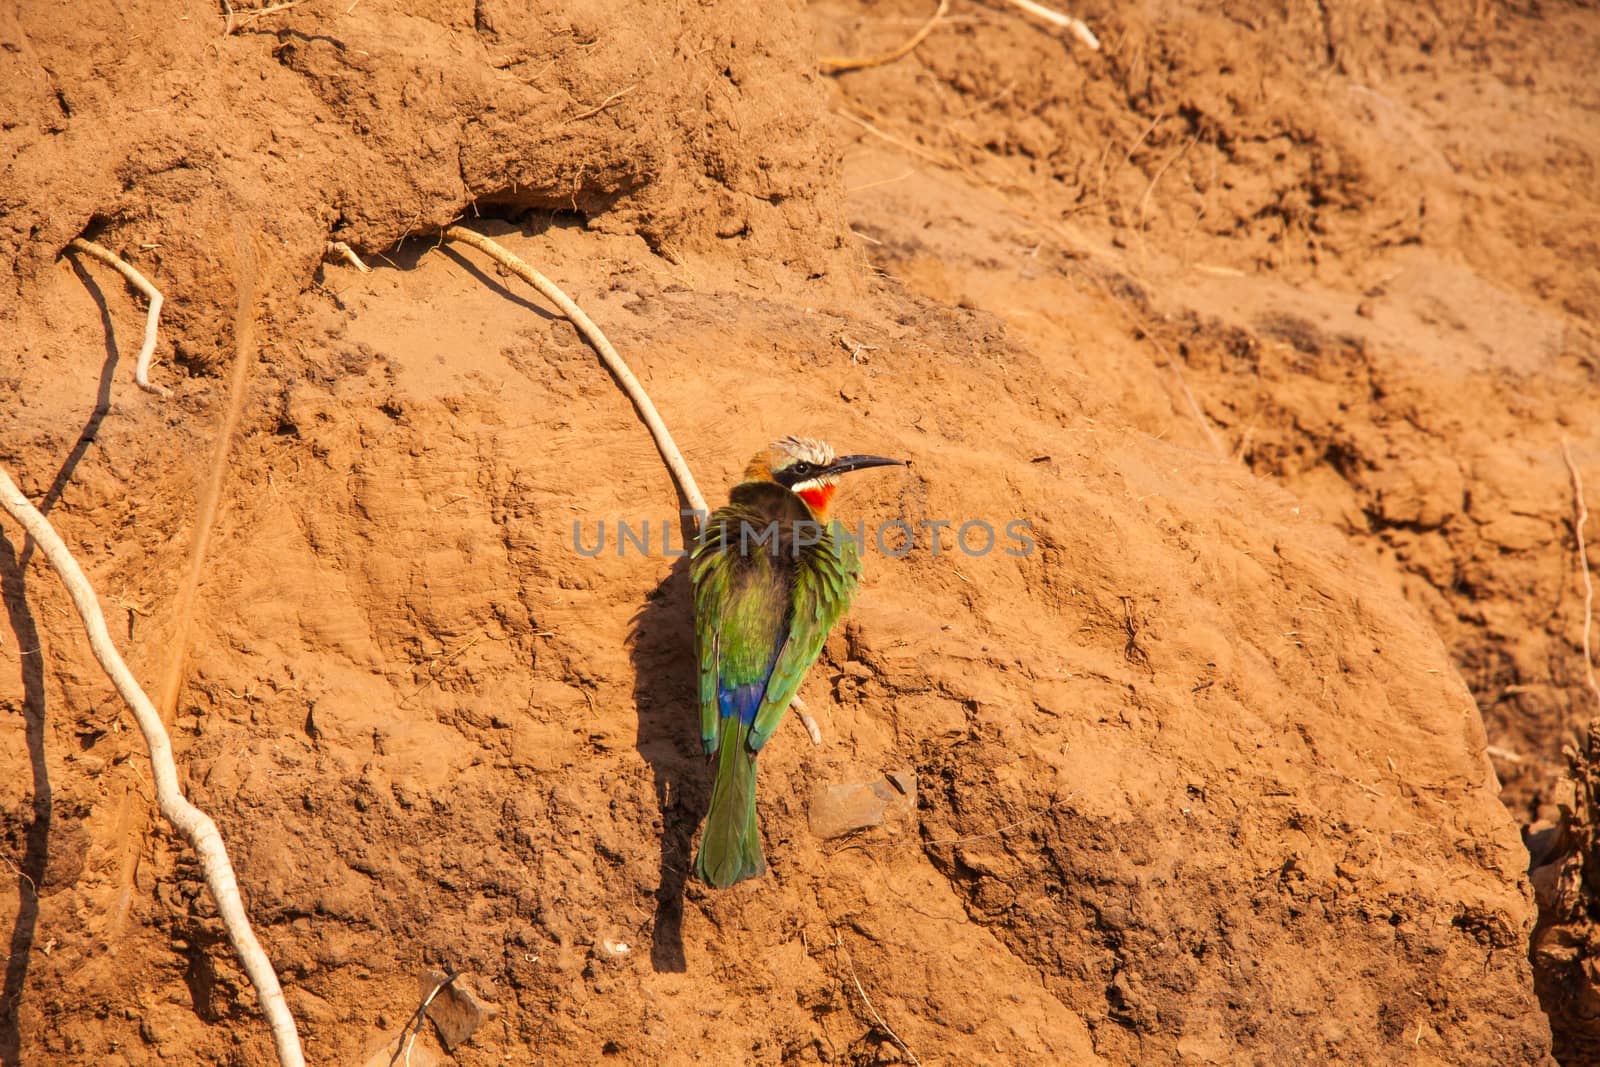 White-fronted Bee-eater, Merops bullockoides, photographed in Kruger National Park.